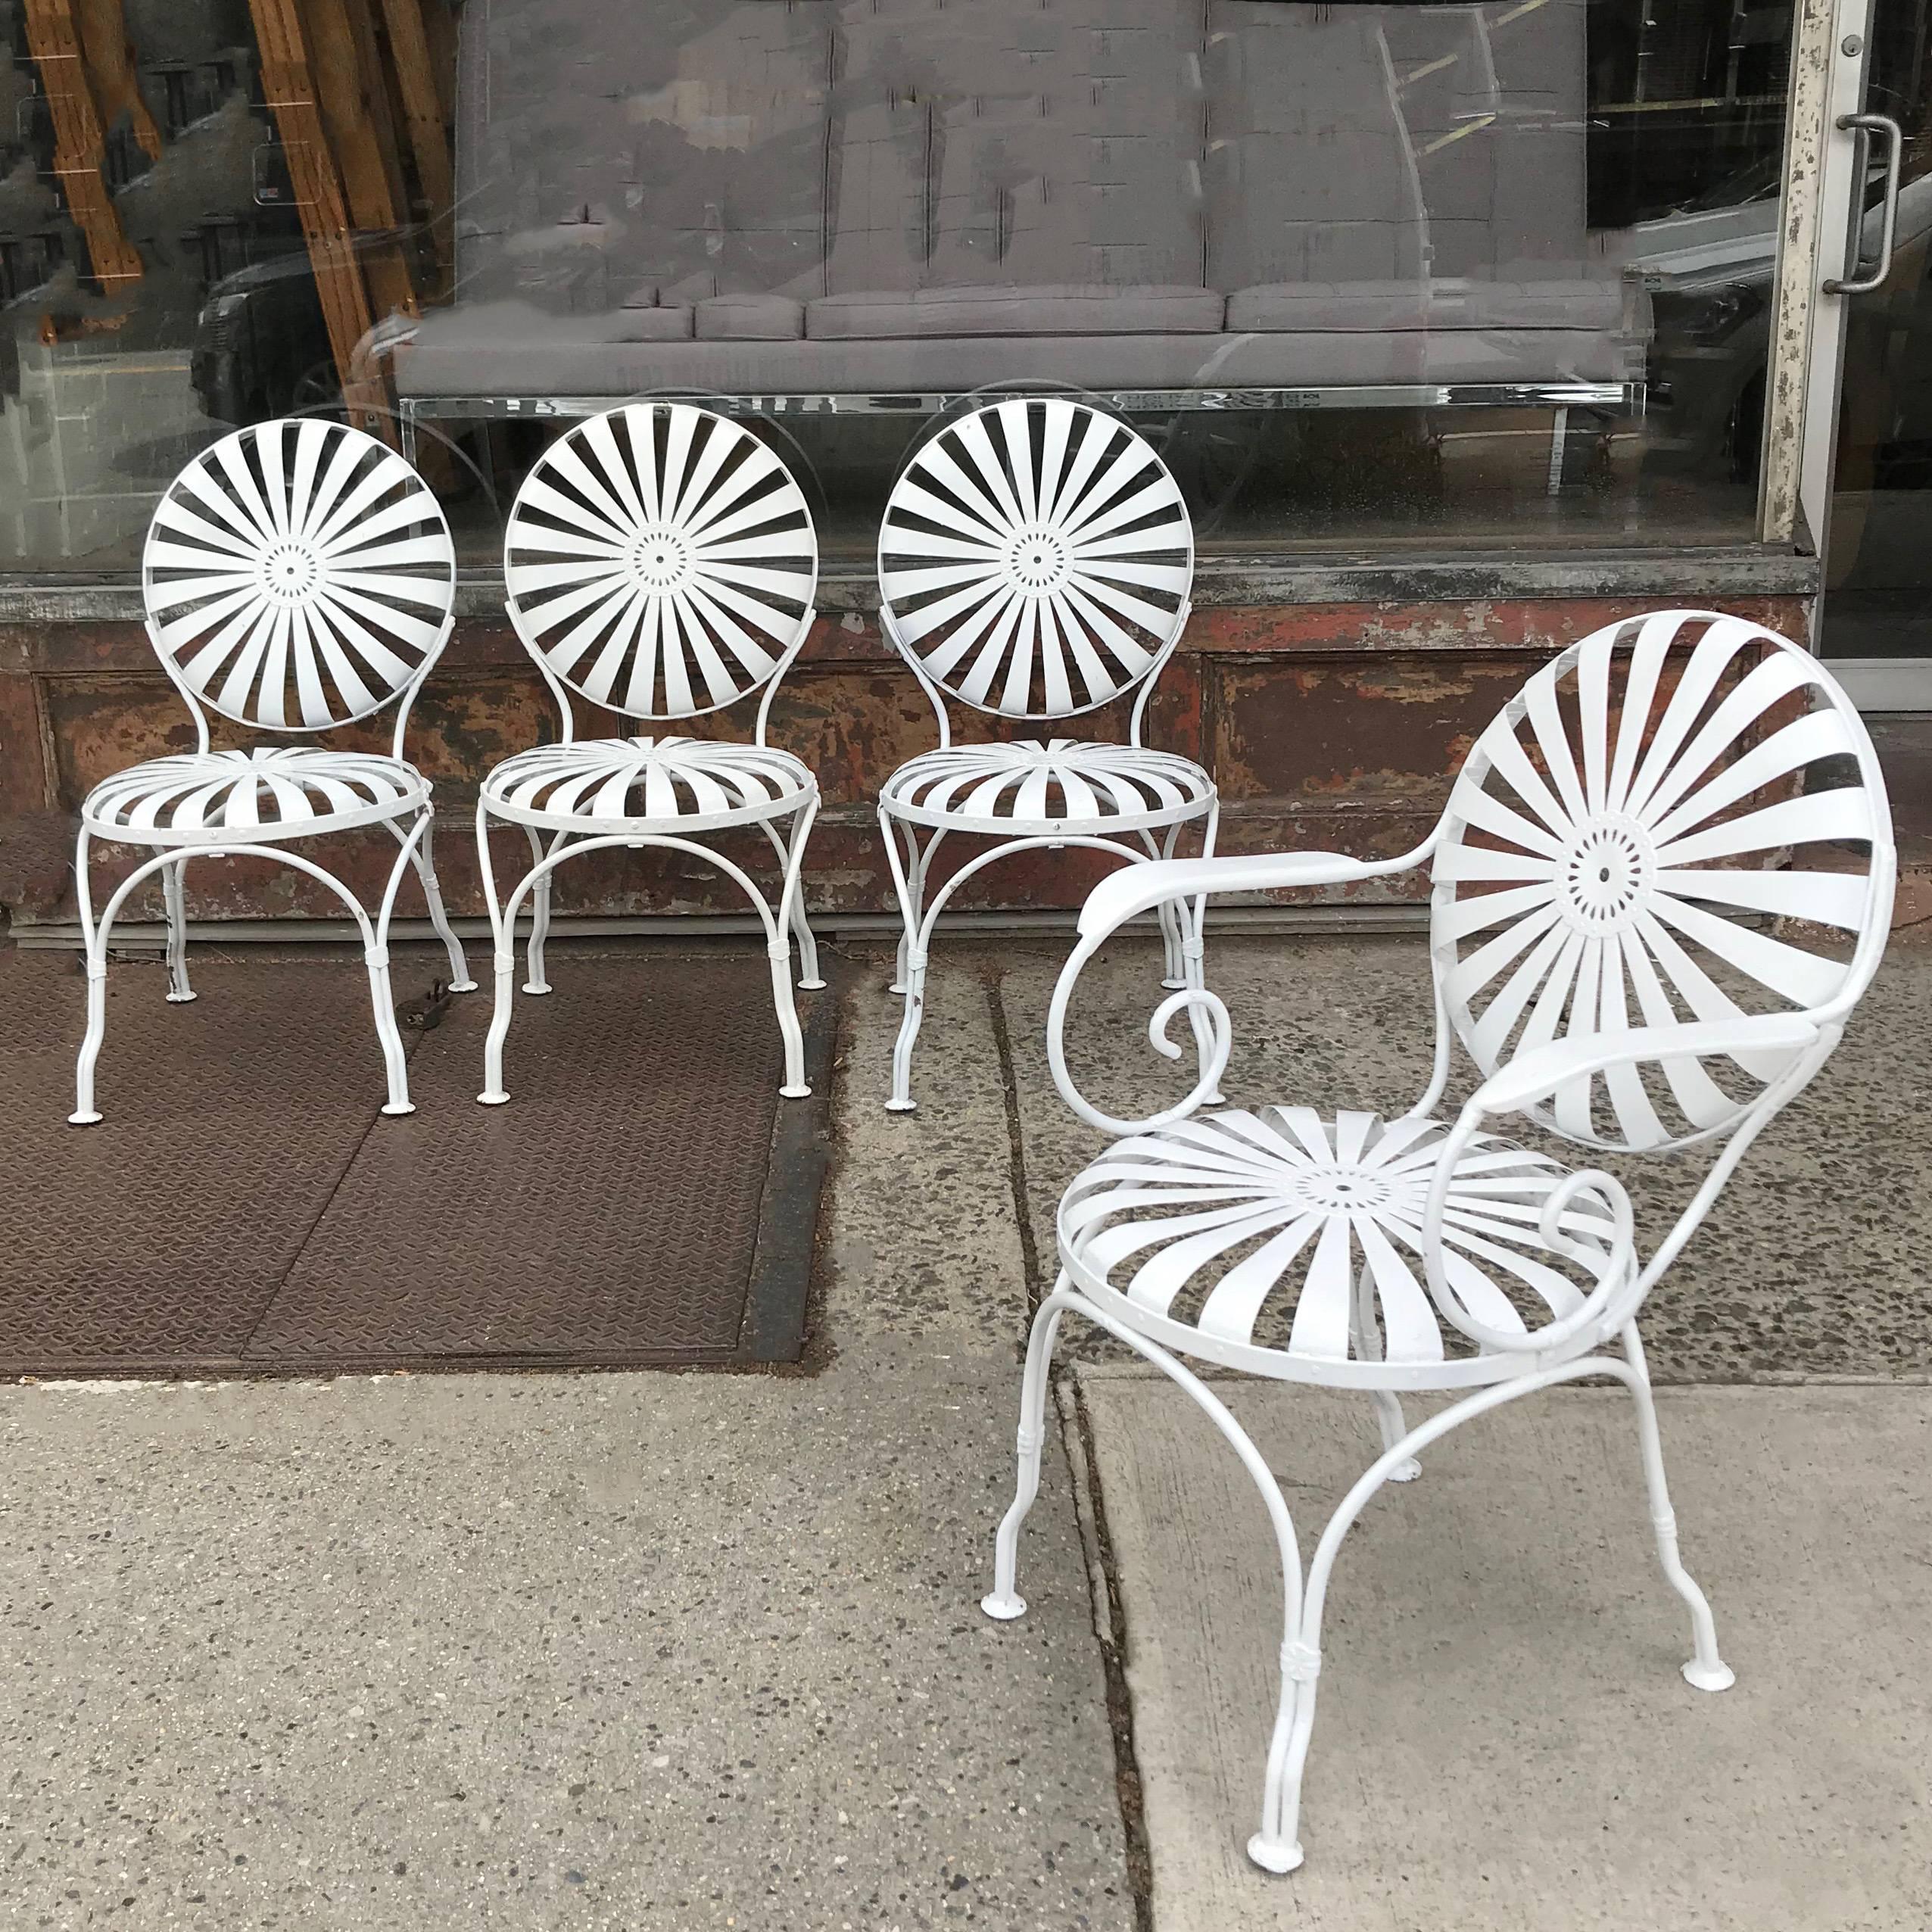 Set of four, Art Deco, garden, patio, outdoor chairs by Francois Carré feature painted wrought iron, sunburst seats and backs. The set includes three side chairs that are 18.5 inches wide and one armchair.